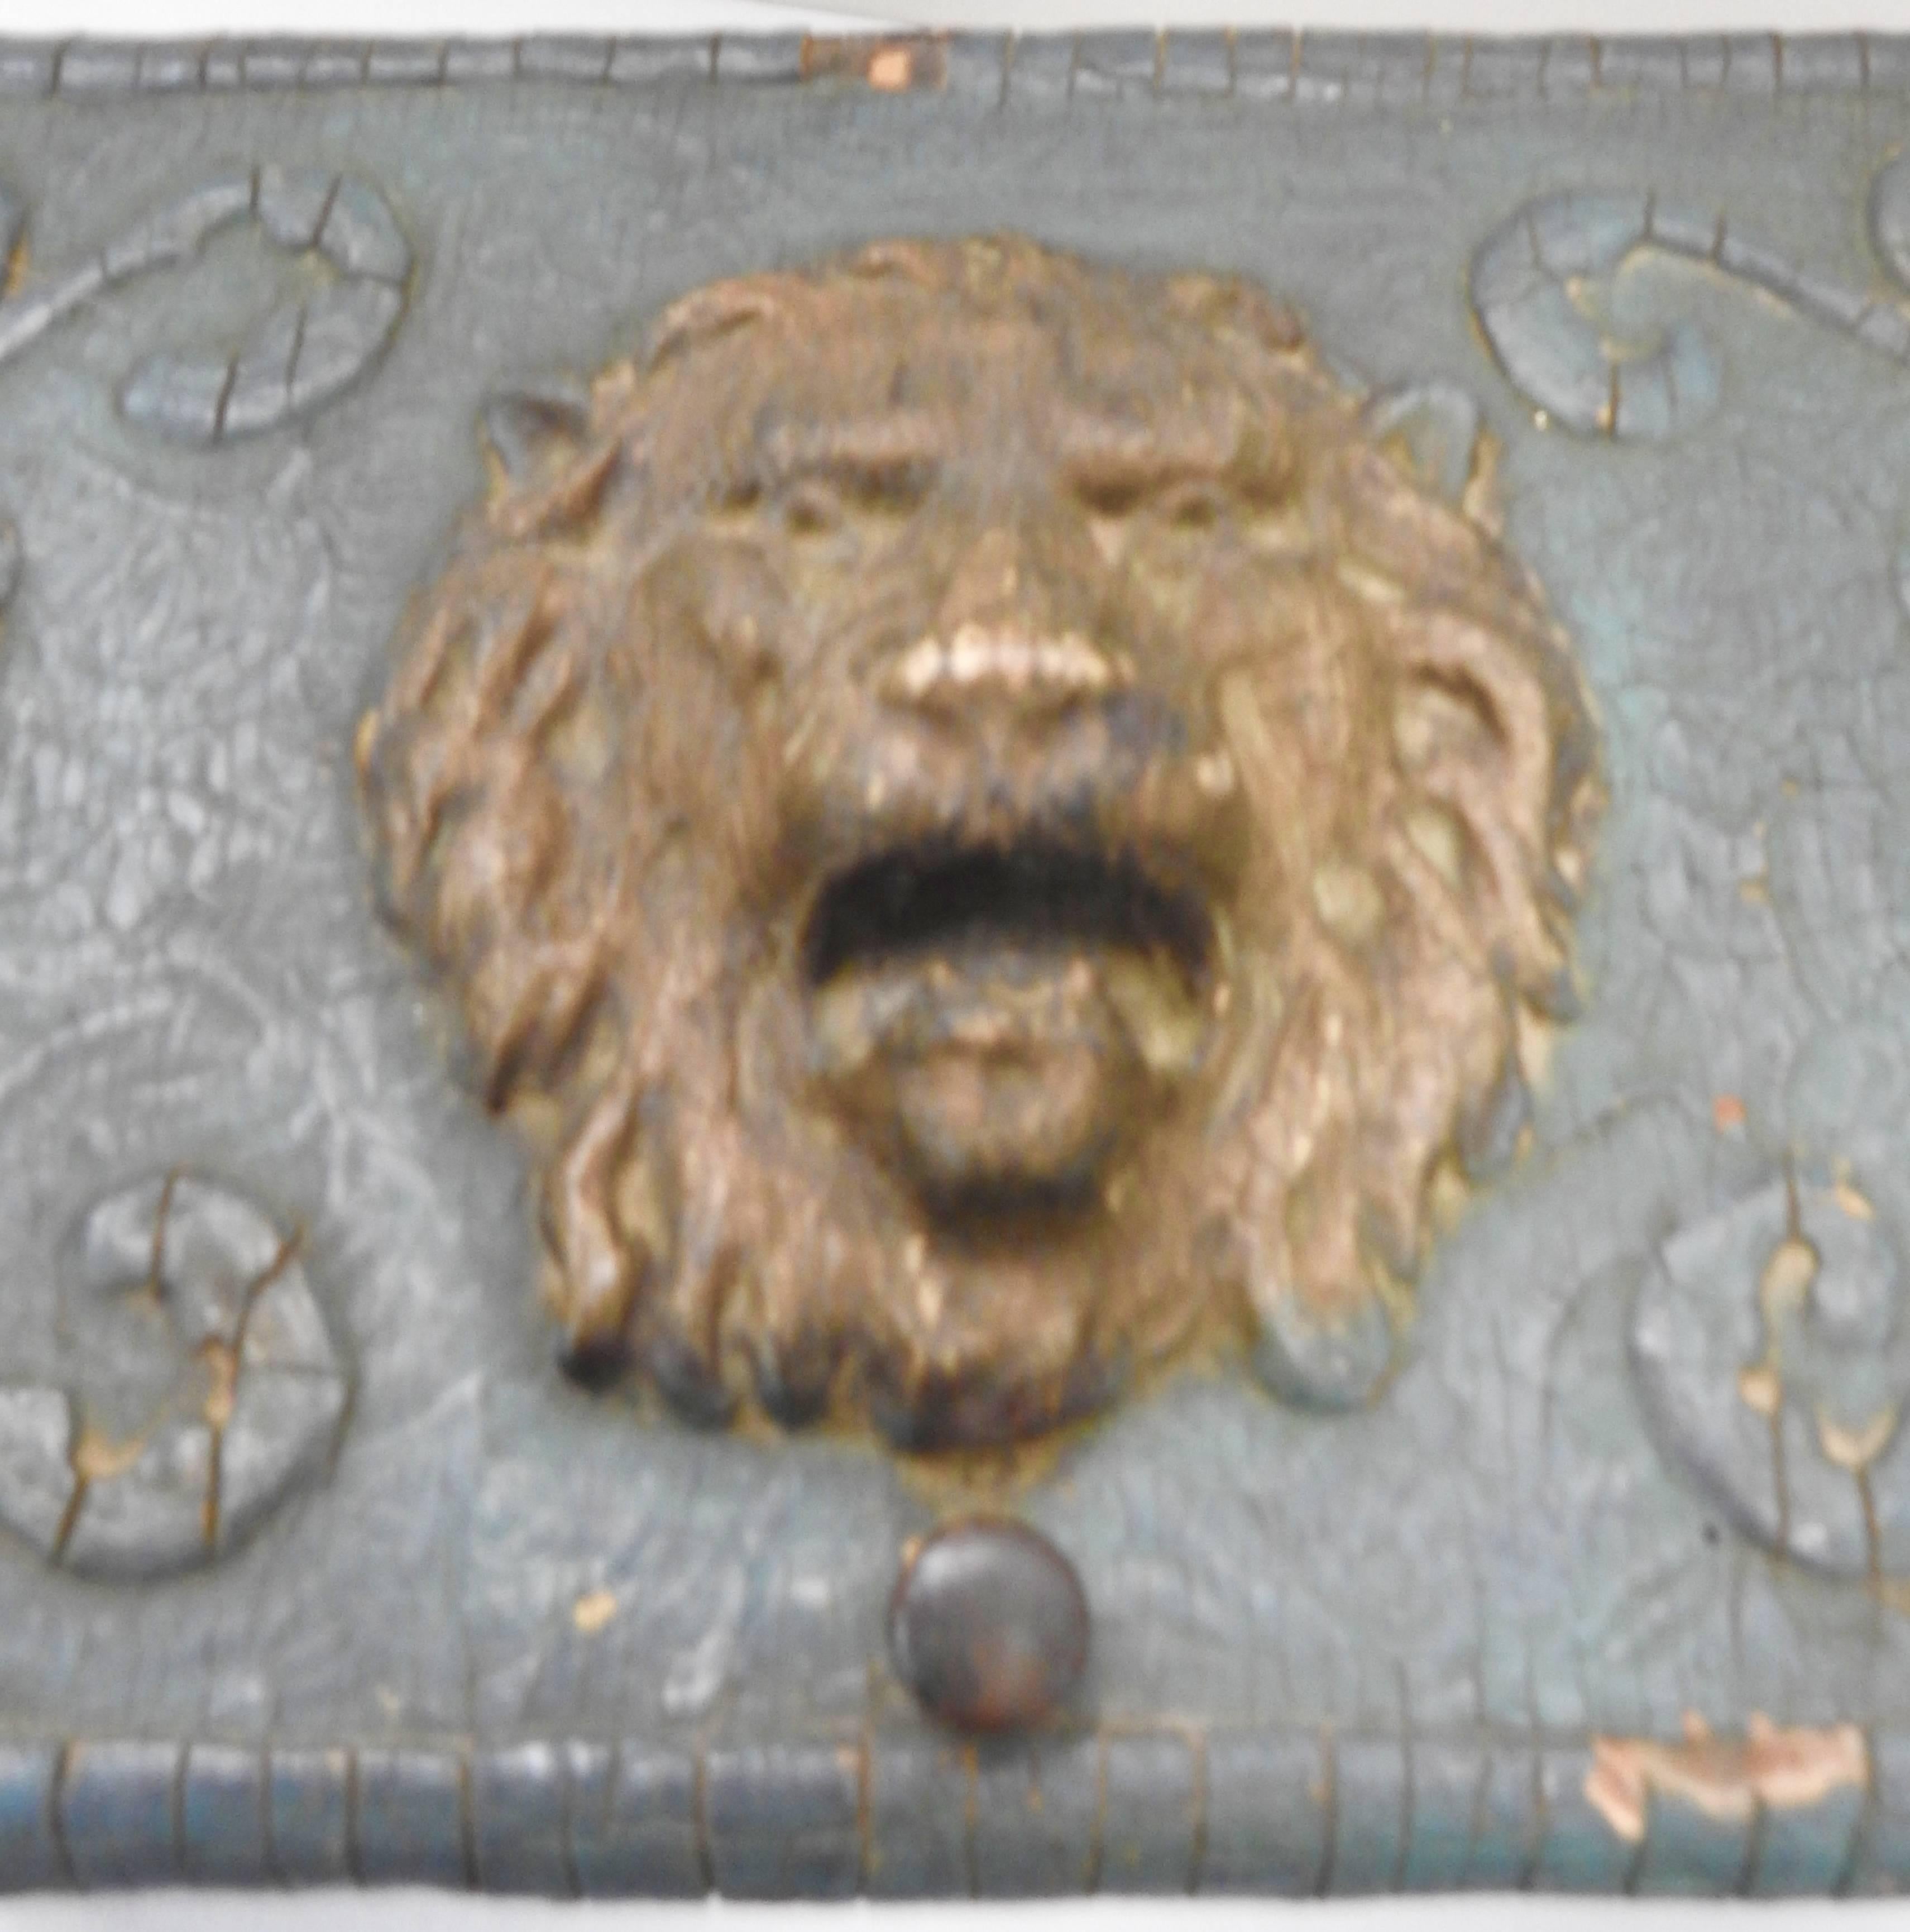 Dusky blue compliments the swirls on this Art Nouveau wooden box which is crowned on top with a roaring lion head. The top opens to swirls of antique gold paint and a chain to support the lid. There is a lock but a key is not available.